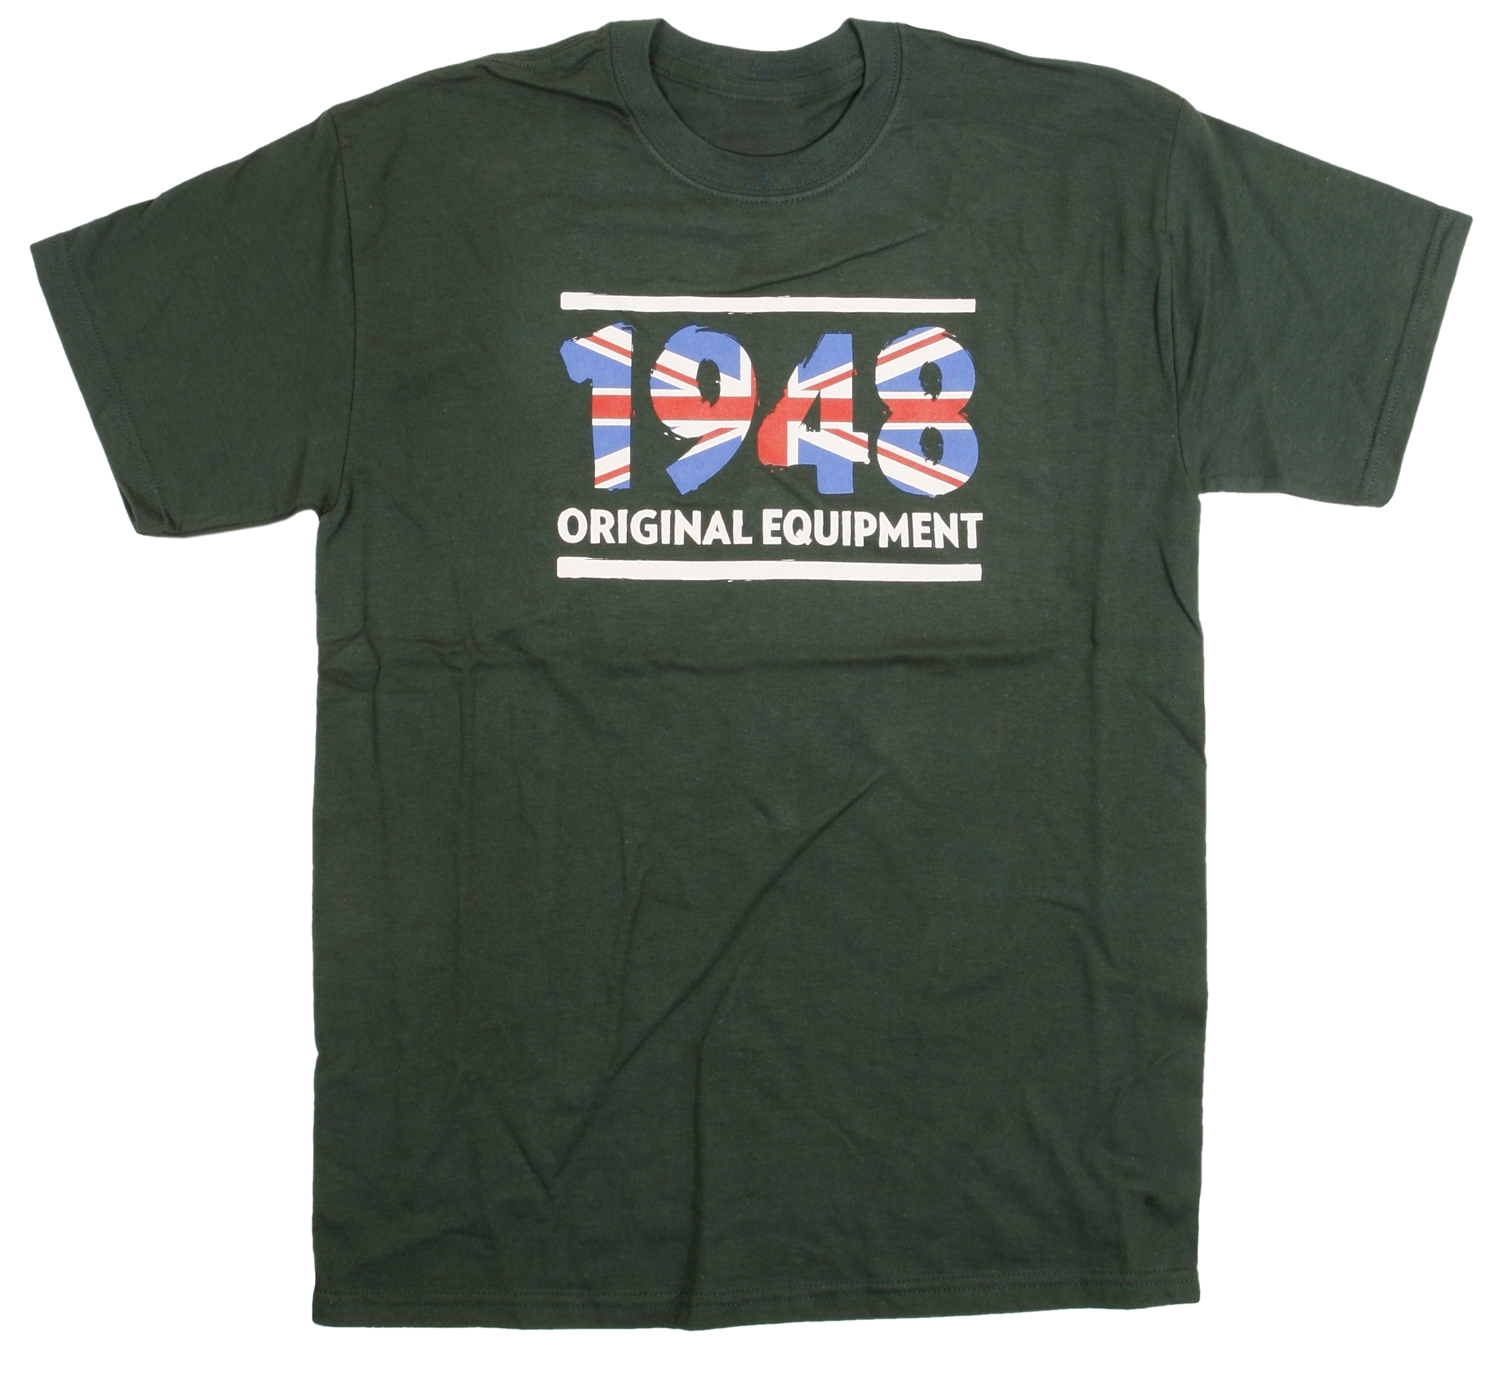 Union 48 T Shirt - Forest Green 